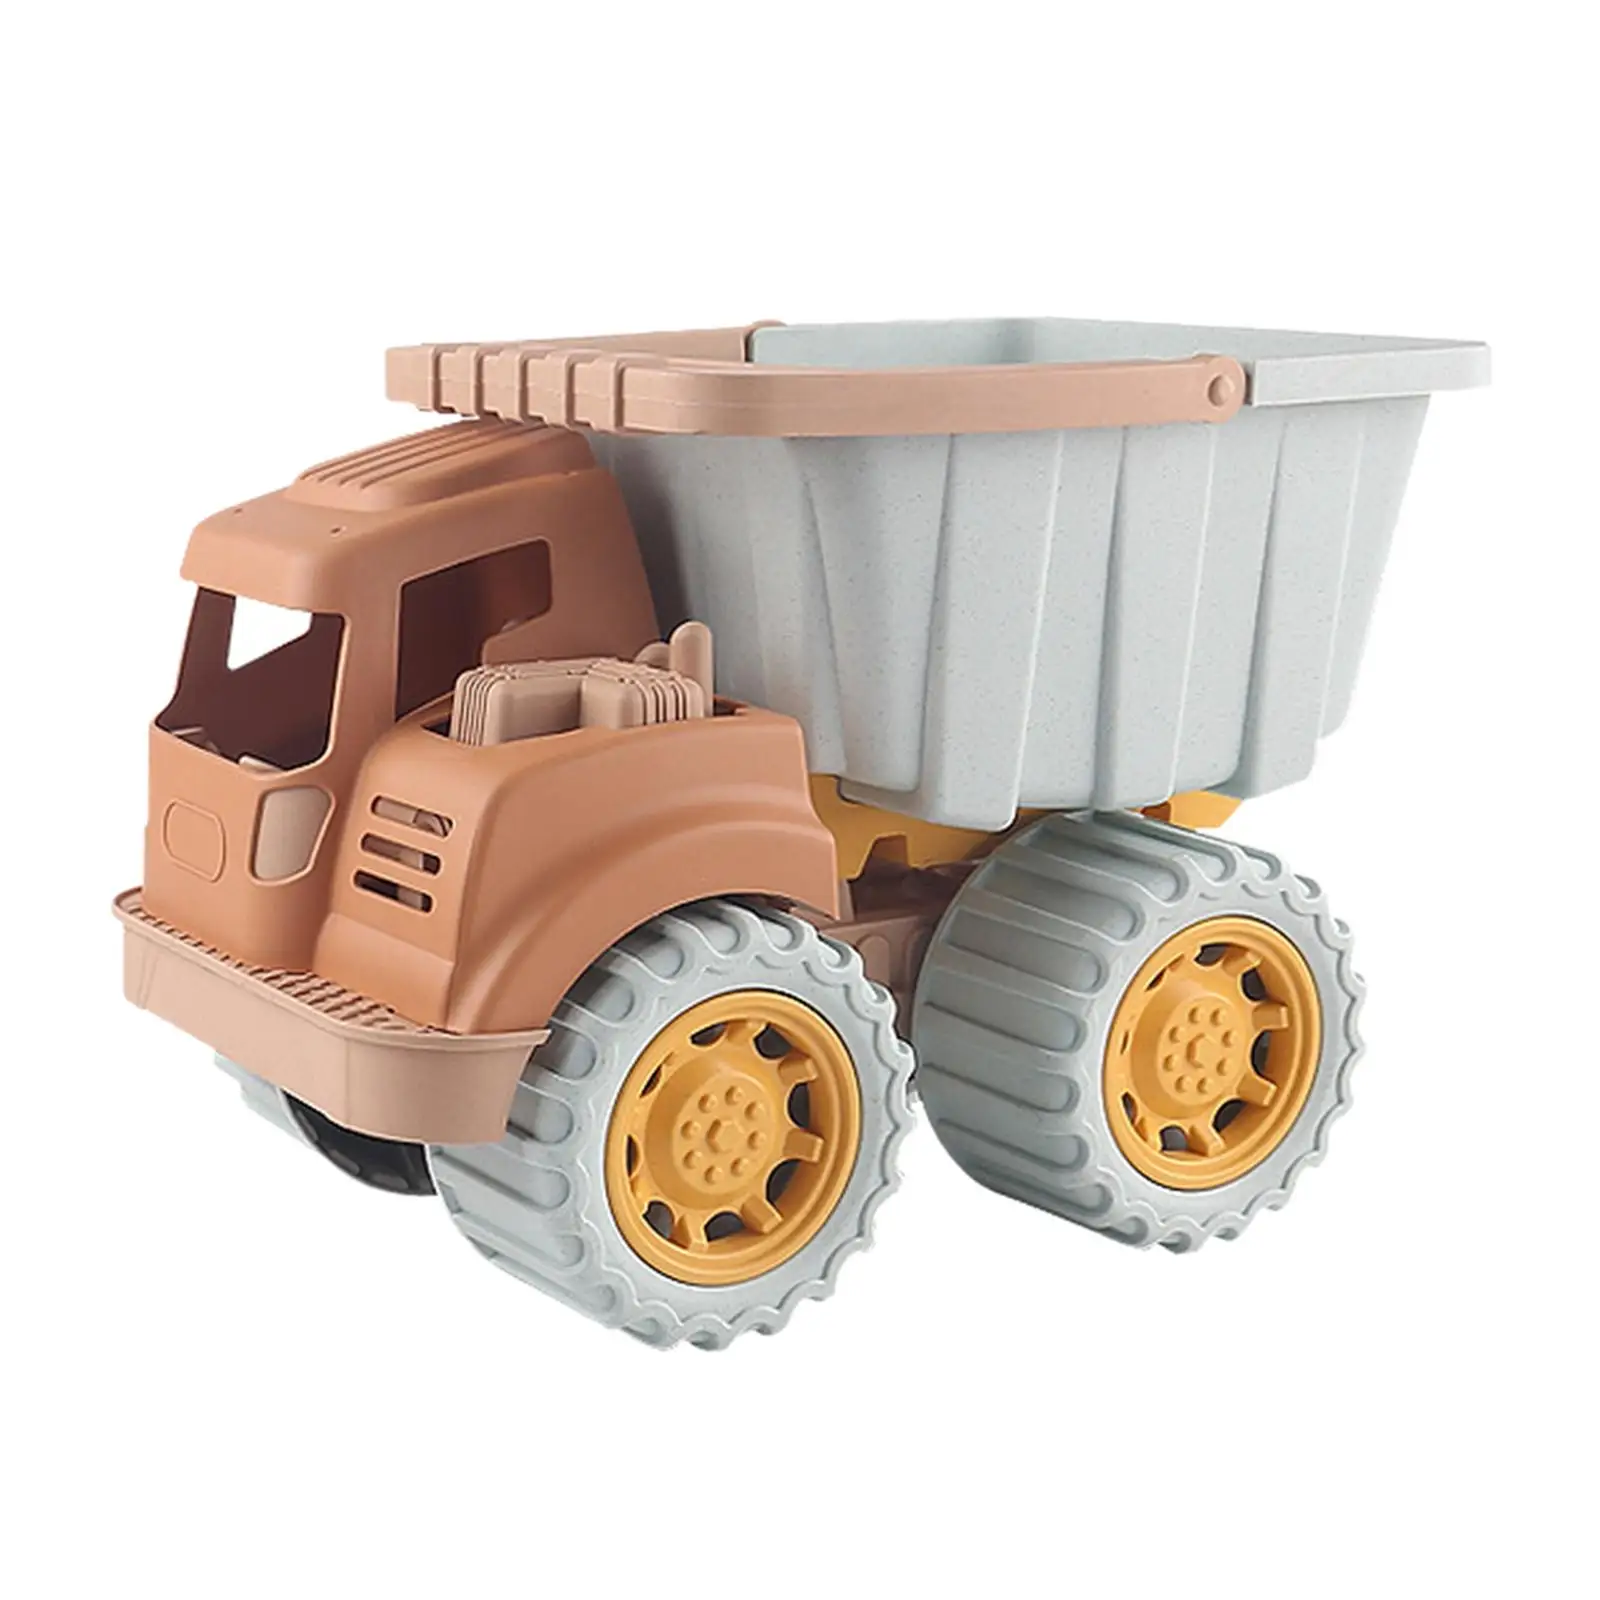 Dump Truck Toy Mini Construction Trucks Sandbox Toys Vehicle for Sand Beach Toy Seaside Play Party Favors Indoors Outdoors Boys